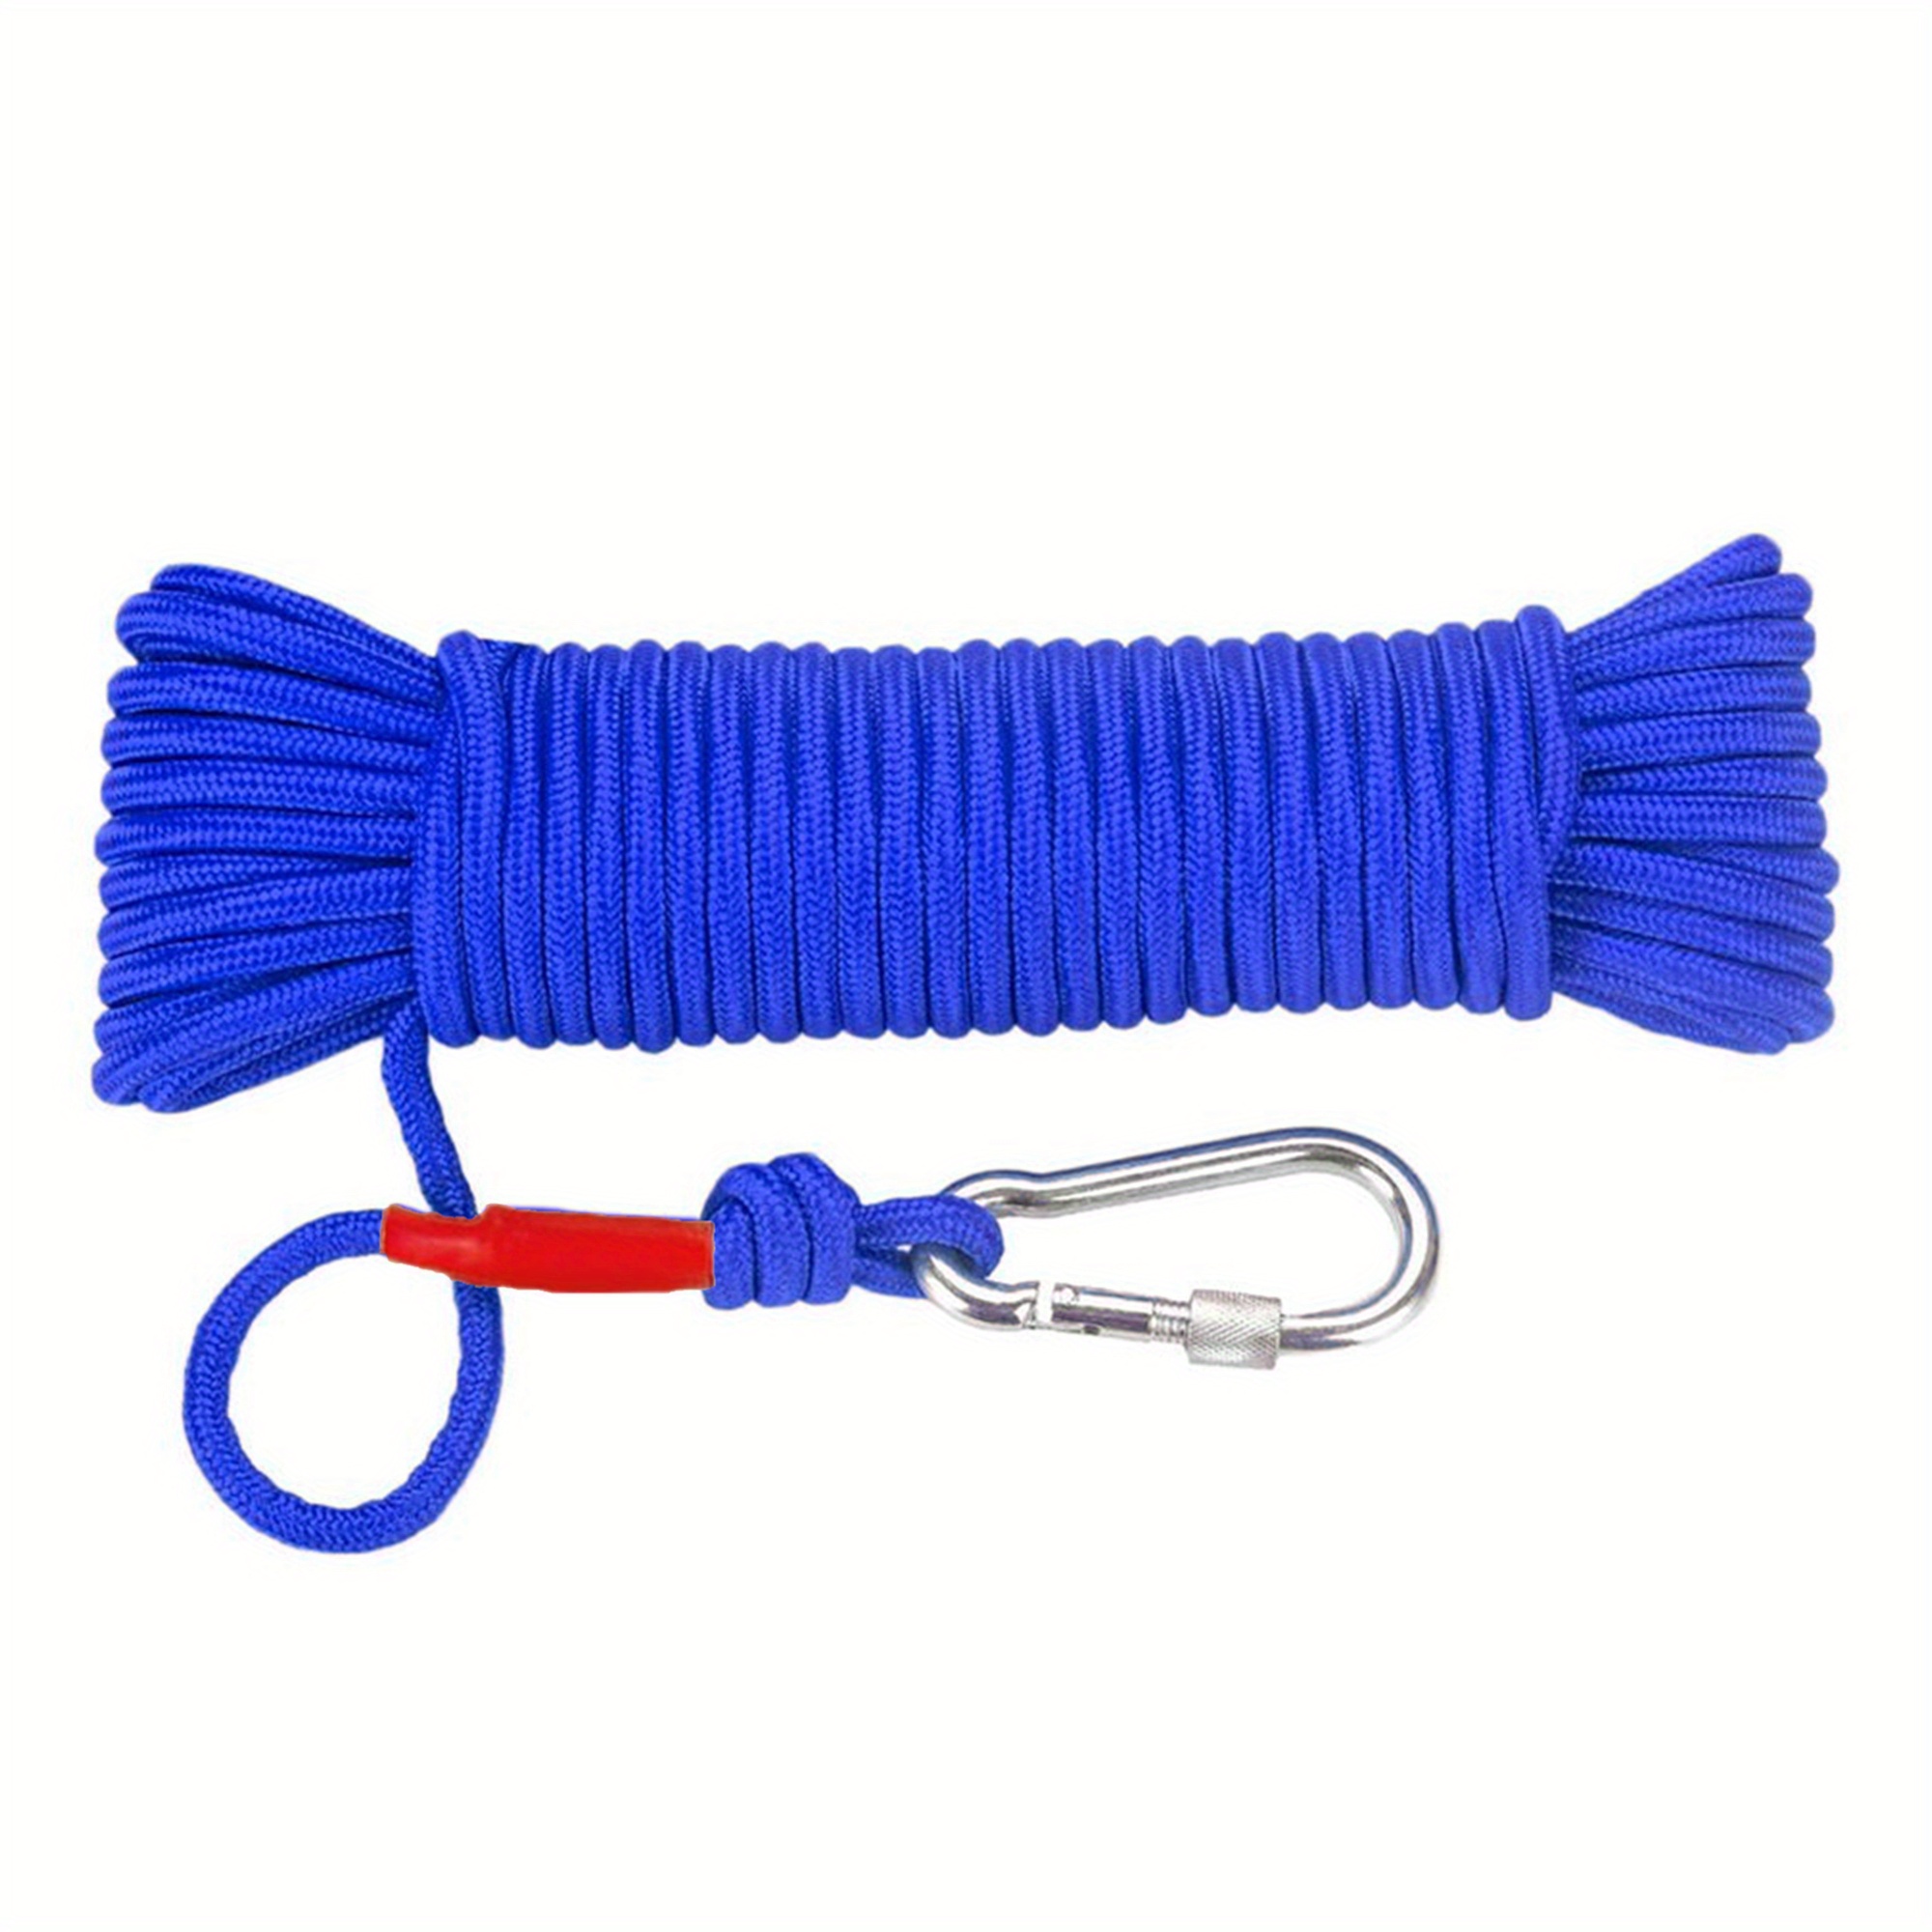 

Magnet Fishing Rope, Carabiner Braid Rope, Nylon Rope Mooring Line For Commercial, Anchor, Clothesline, Boat Anchor, Crafting, Blocking, Pulling, Draging, Cargo, Tying, Tow Rope, Paracord Leash